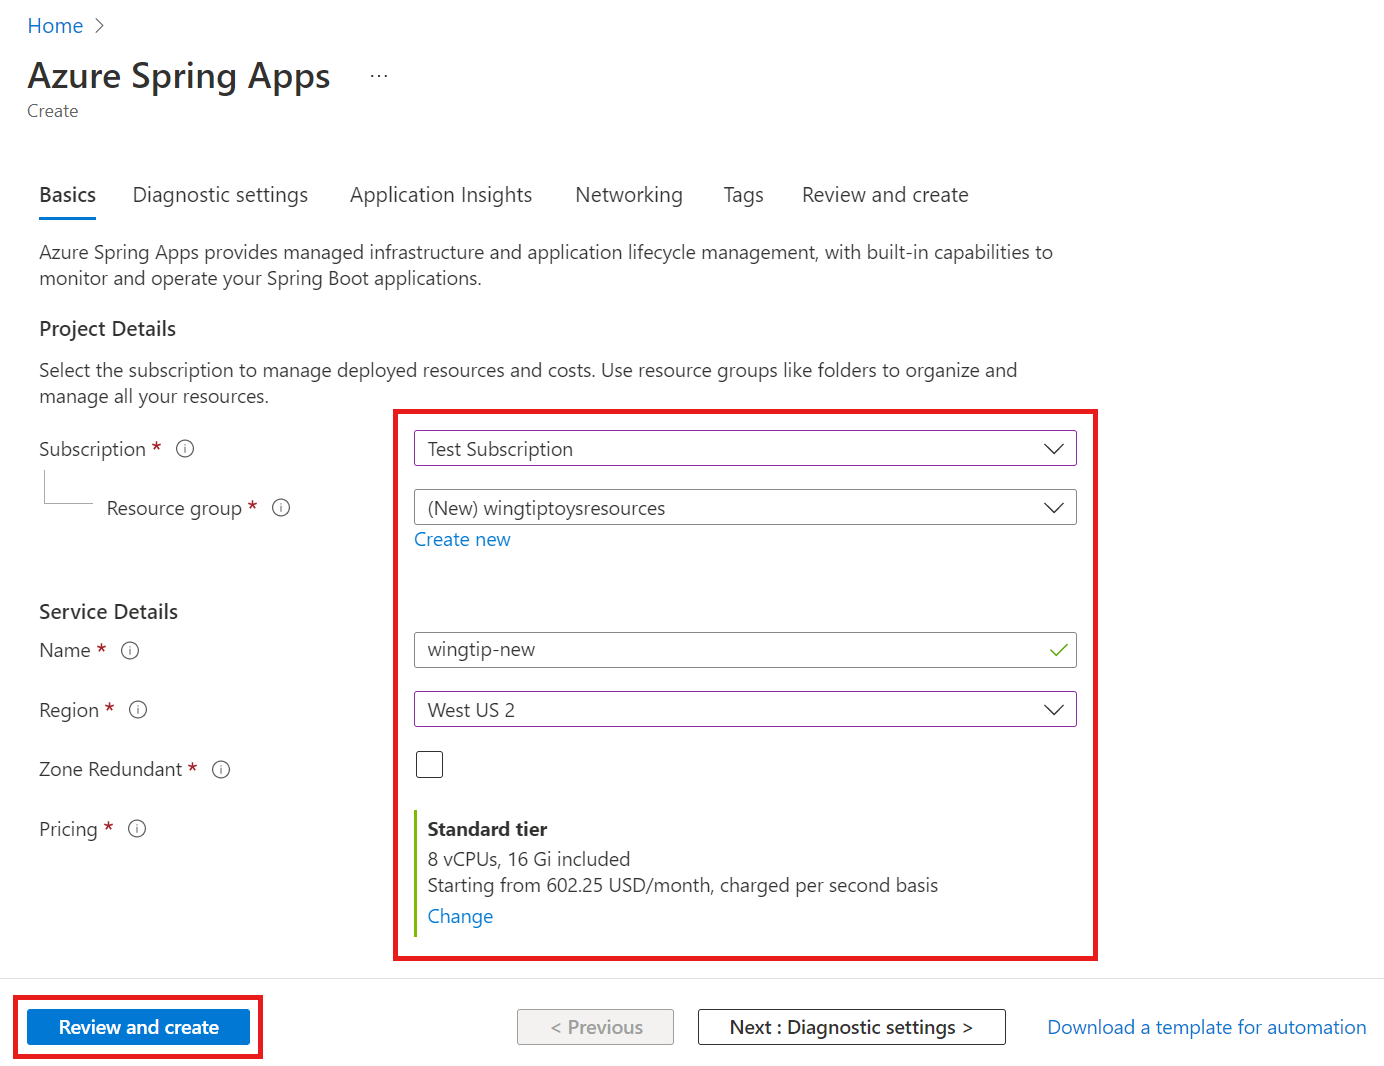 Screenshot of Azure portal showing the Azure Spring Apps Create page.